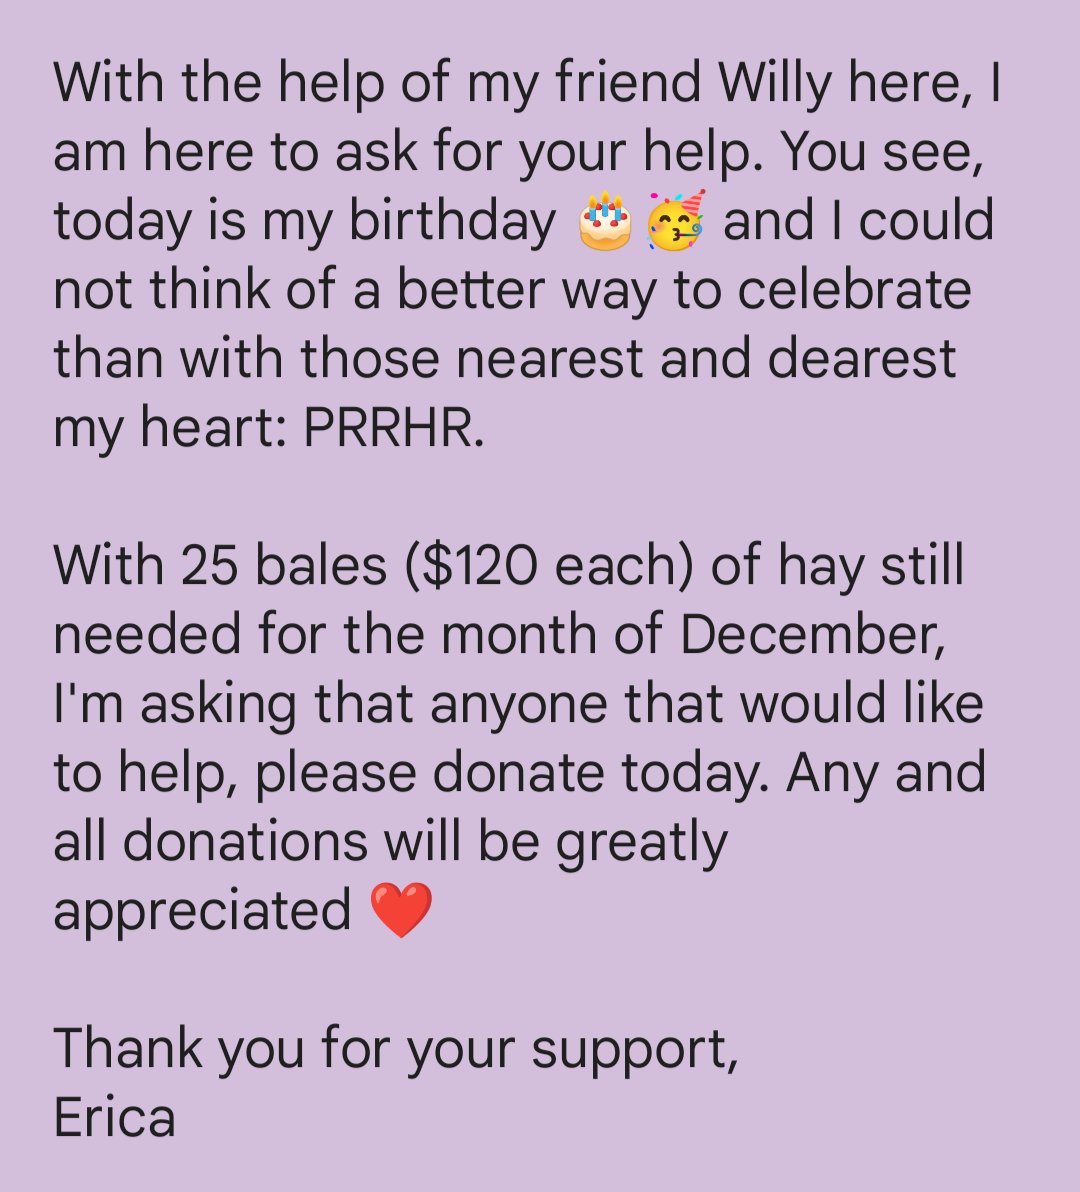 🎂 Would you like to help me celebrate my birthday? Details are in the write-up below 🥳
Thank you!!
💗Erica
Our donation links: 
Linktr.ee/PRRHR
#Horse #Rescue #Donate #Give #Gift #Support #Birthday #Love #Help #GivingSeason #GiftIdeas